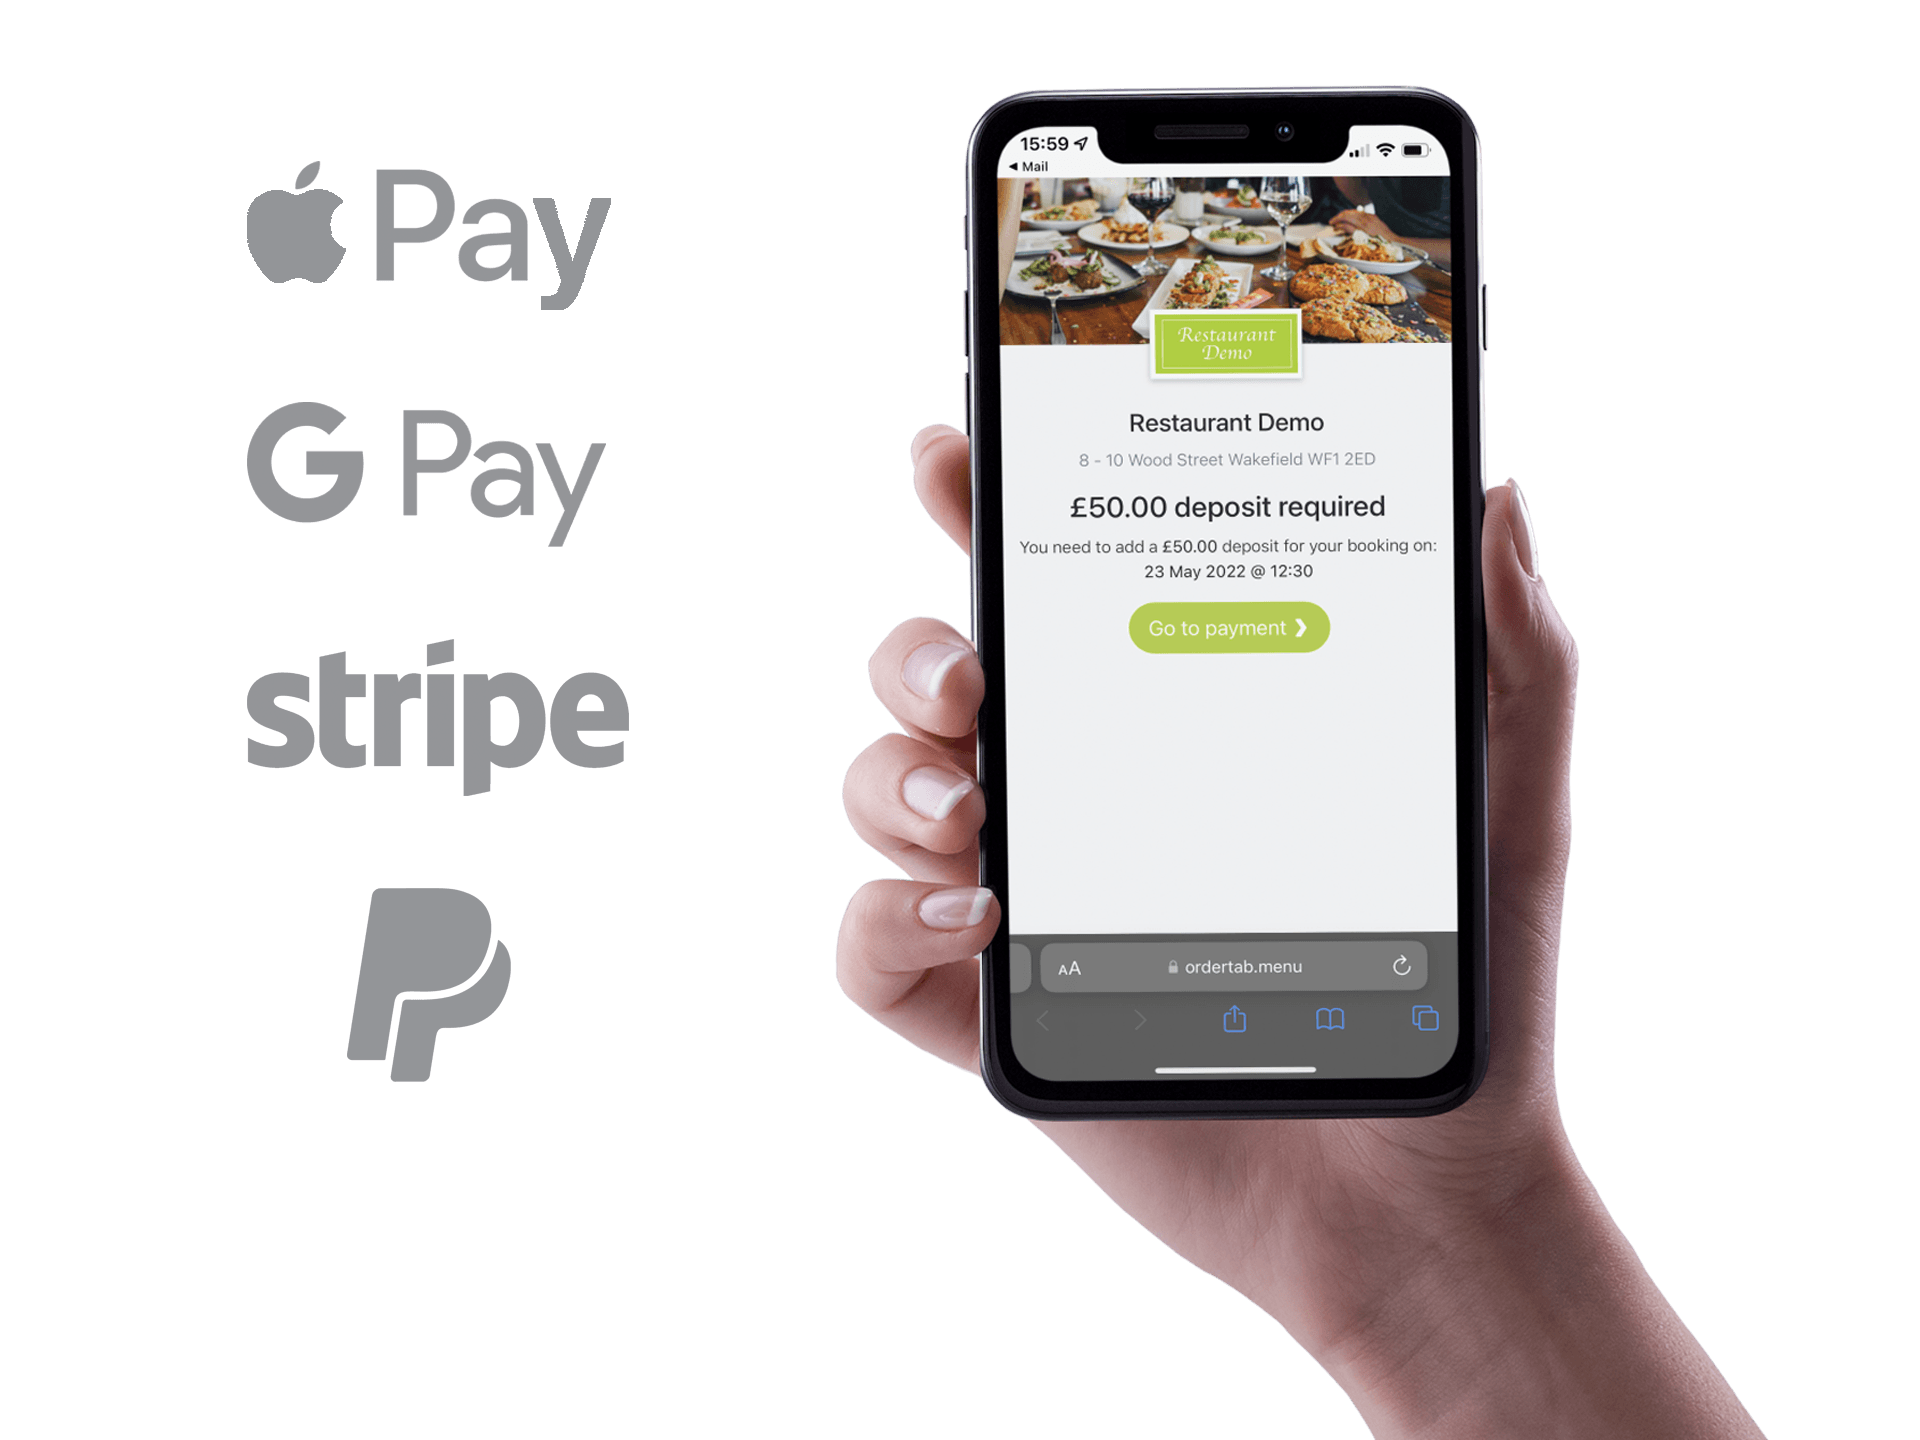 Secure deposit payment link viewed on mobile